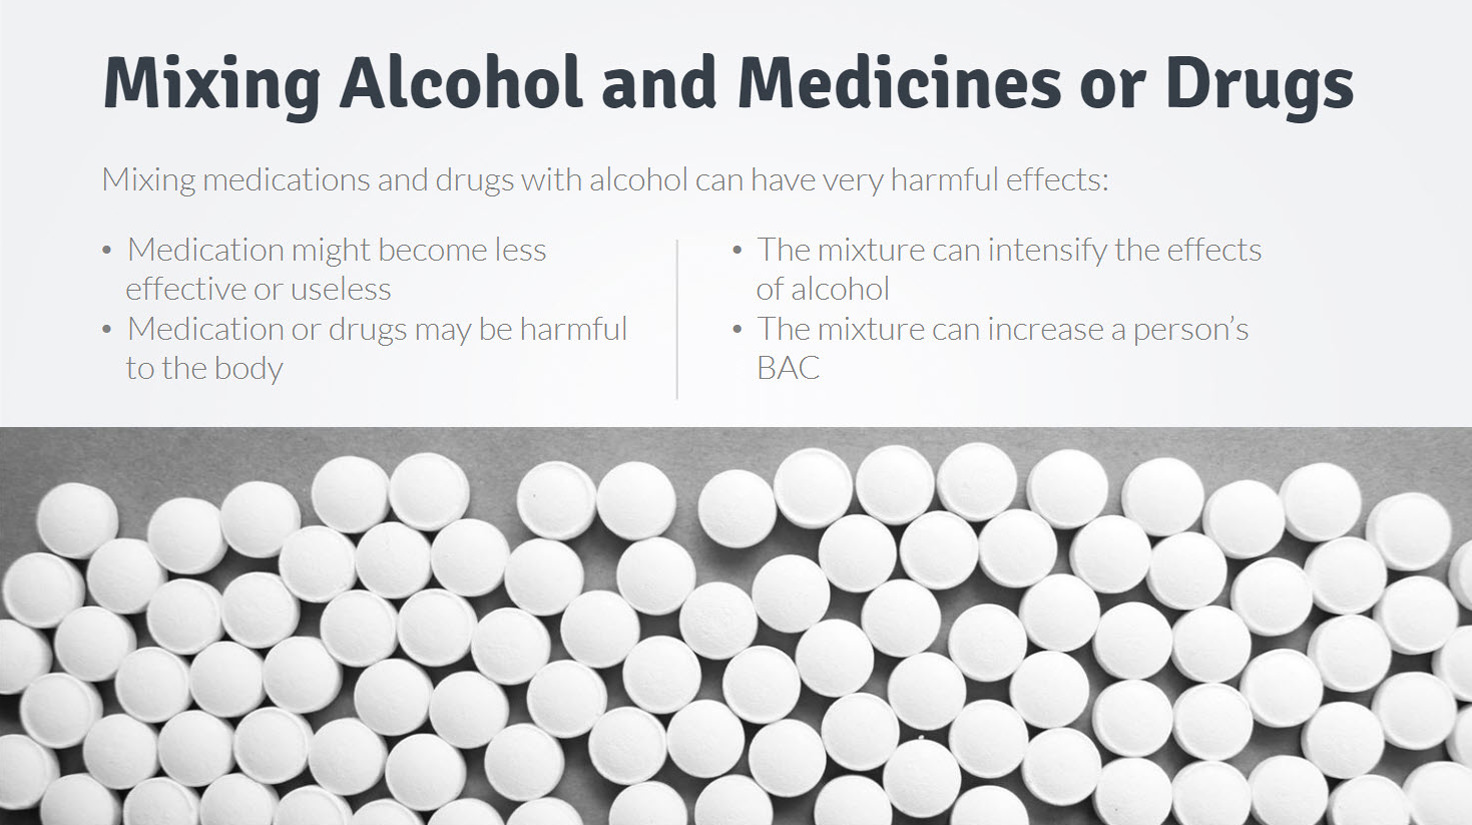 Mixing Alcohol and Medicines